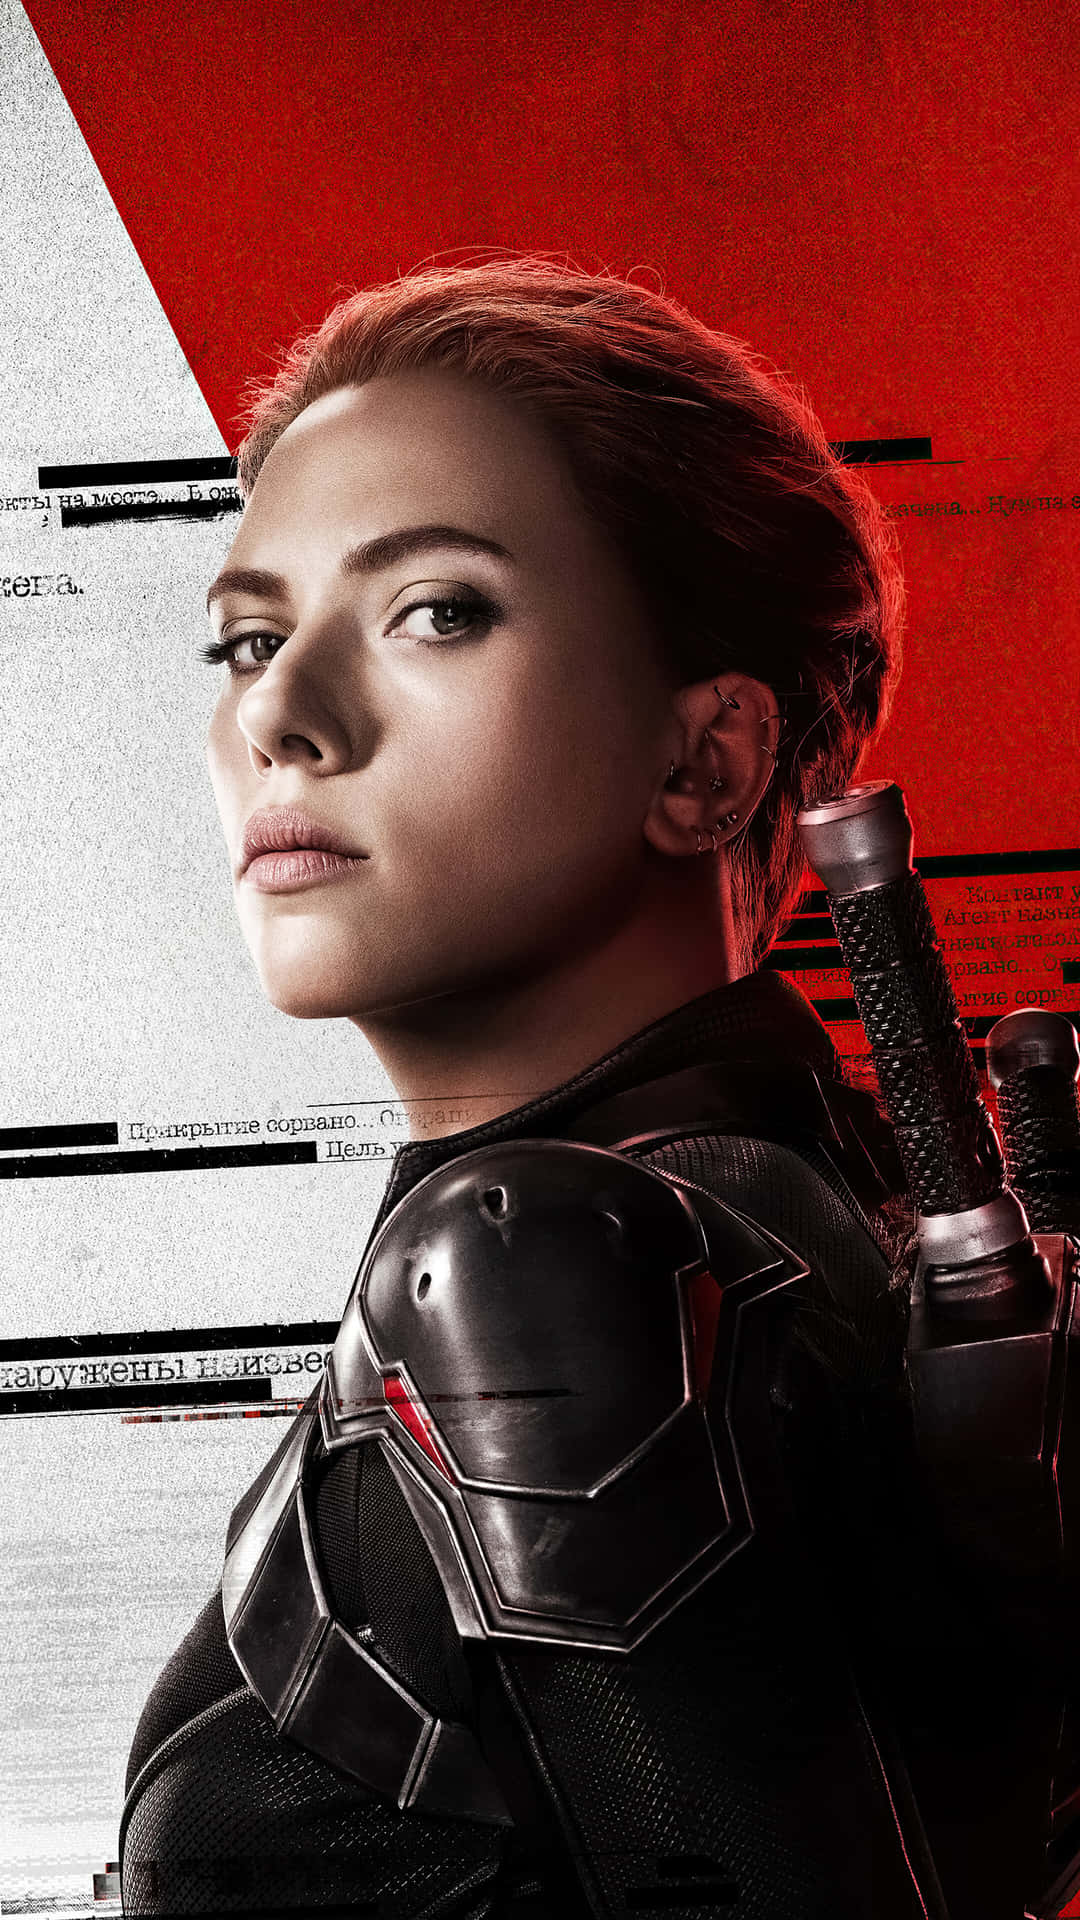 Get your hands on the latest from Black Widow with this sleek iPhone Wallpaper